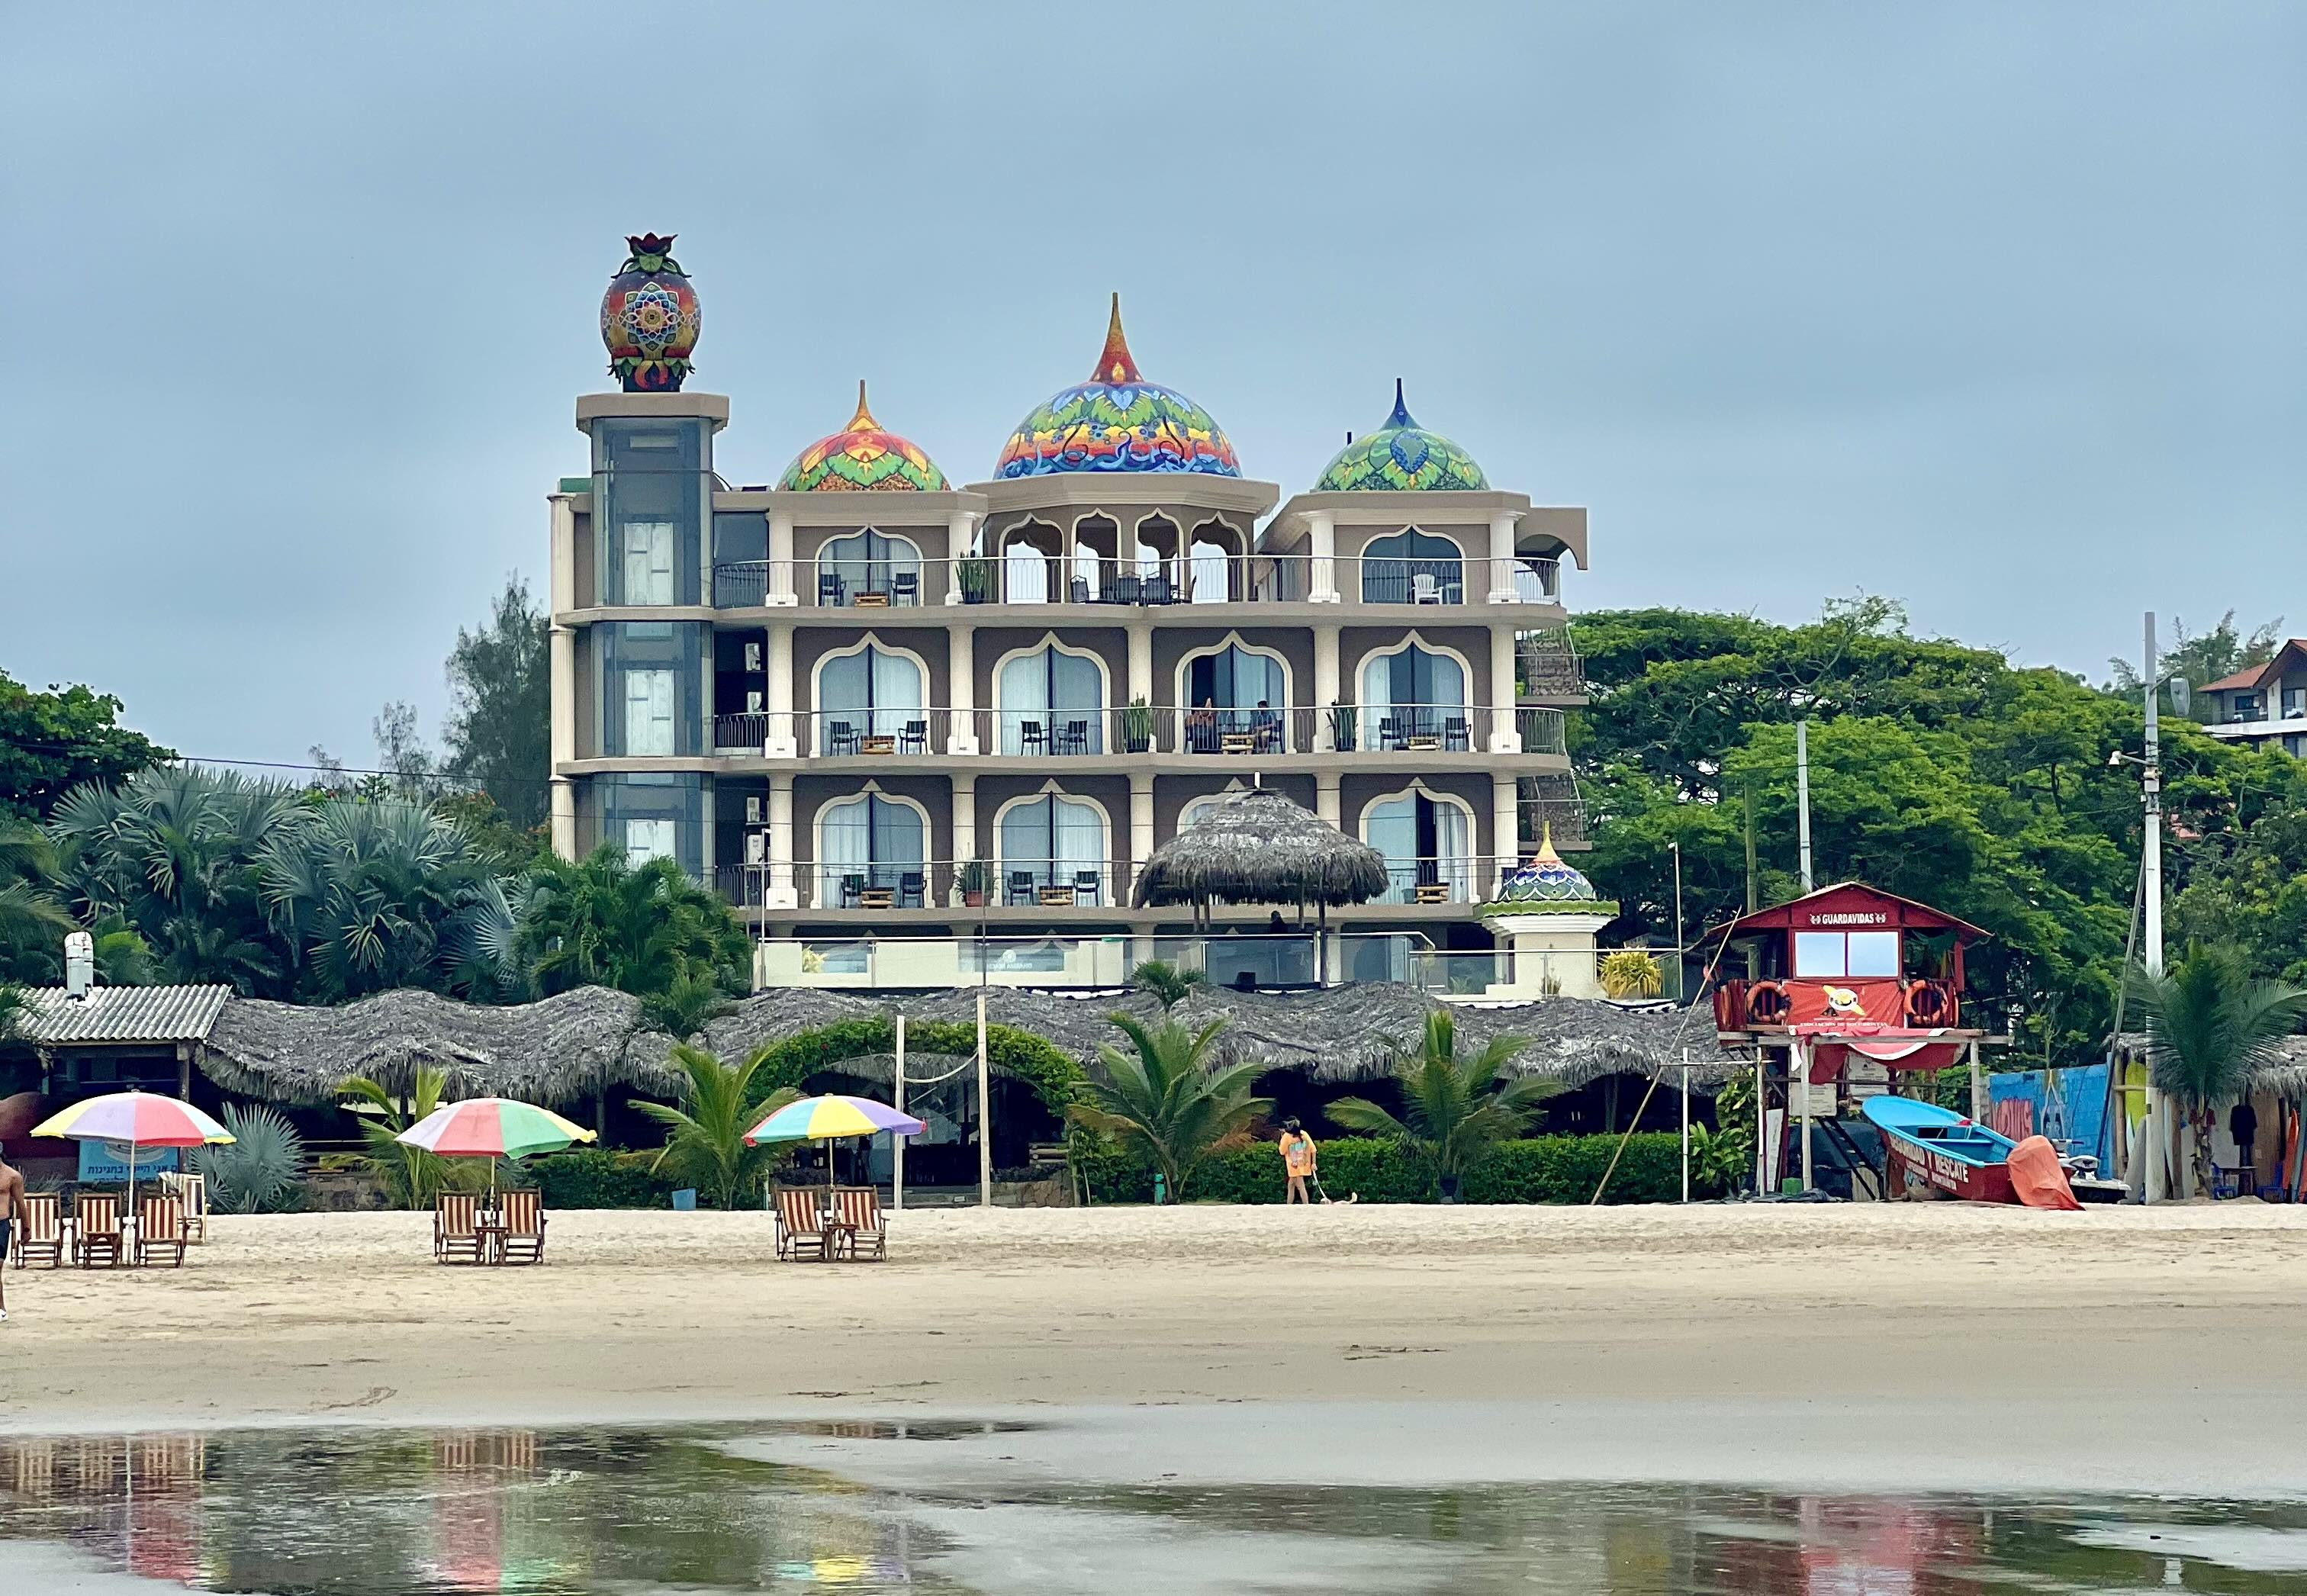 Colorful domes top an eclectic beachfront Dharma Beach building with a large owl statue, flanked by palm-thatched huts and colorful beach umbrellas on the sandy shores of Montañita Beach.